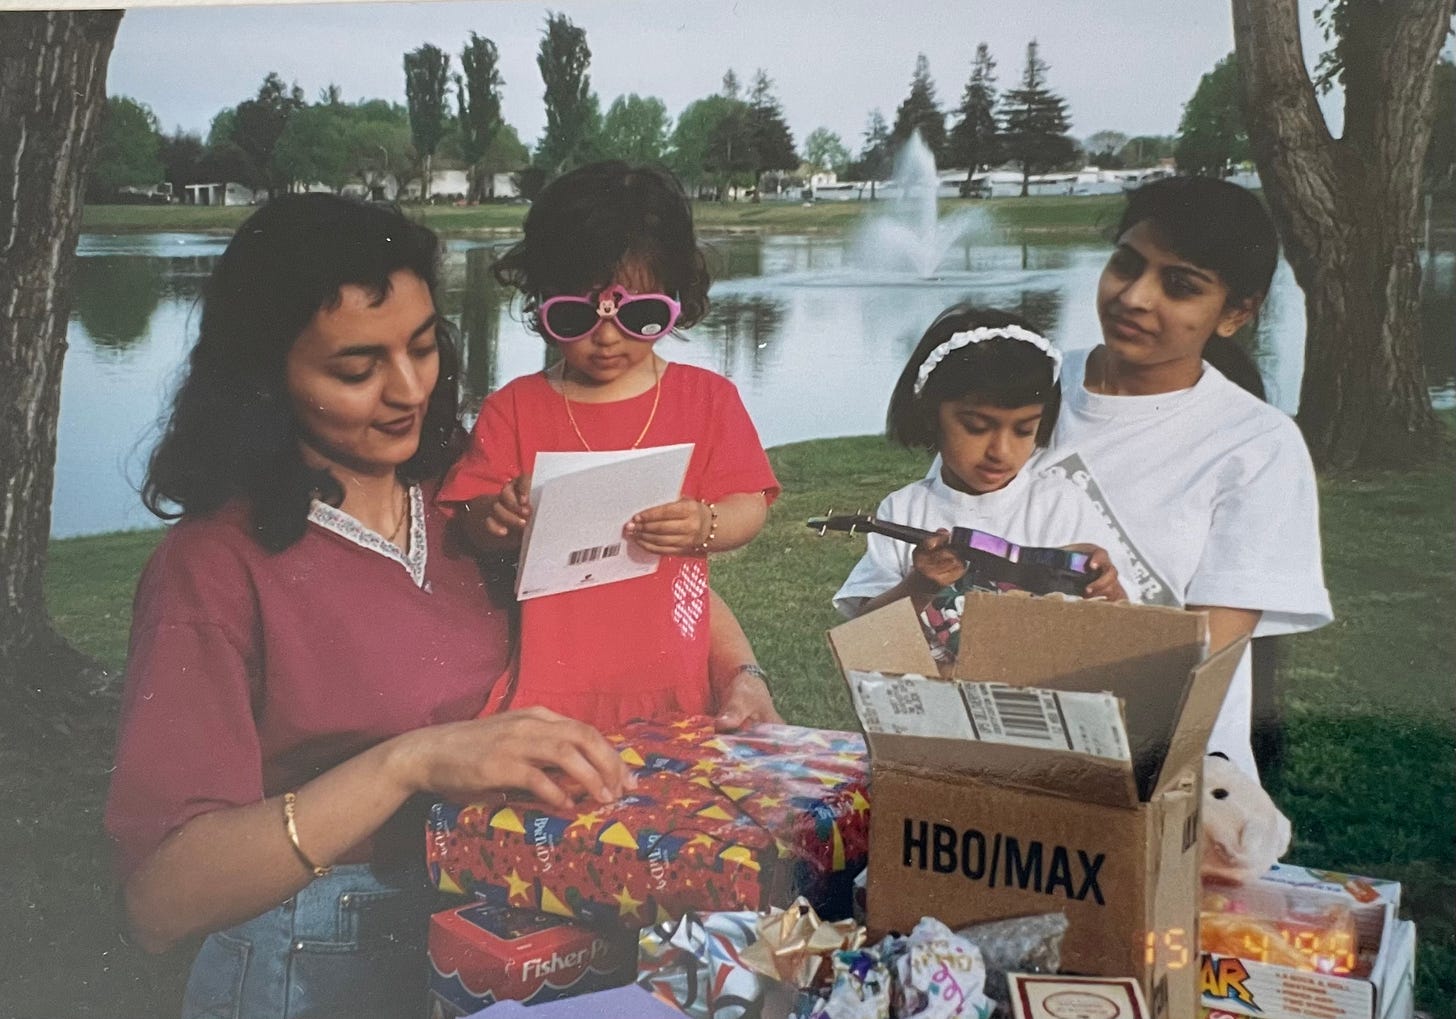 Two mothers with their toddlers. The toddlers play with toys and cards while the mothers look on. They stand in front of a table full of presents and behind them are a pond and trees.